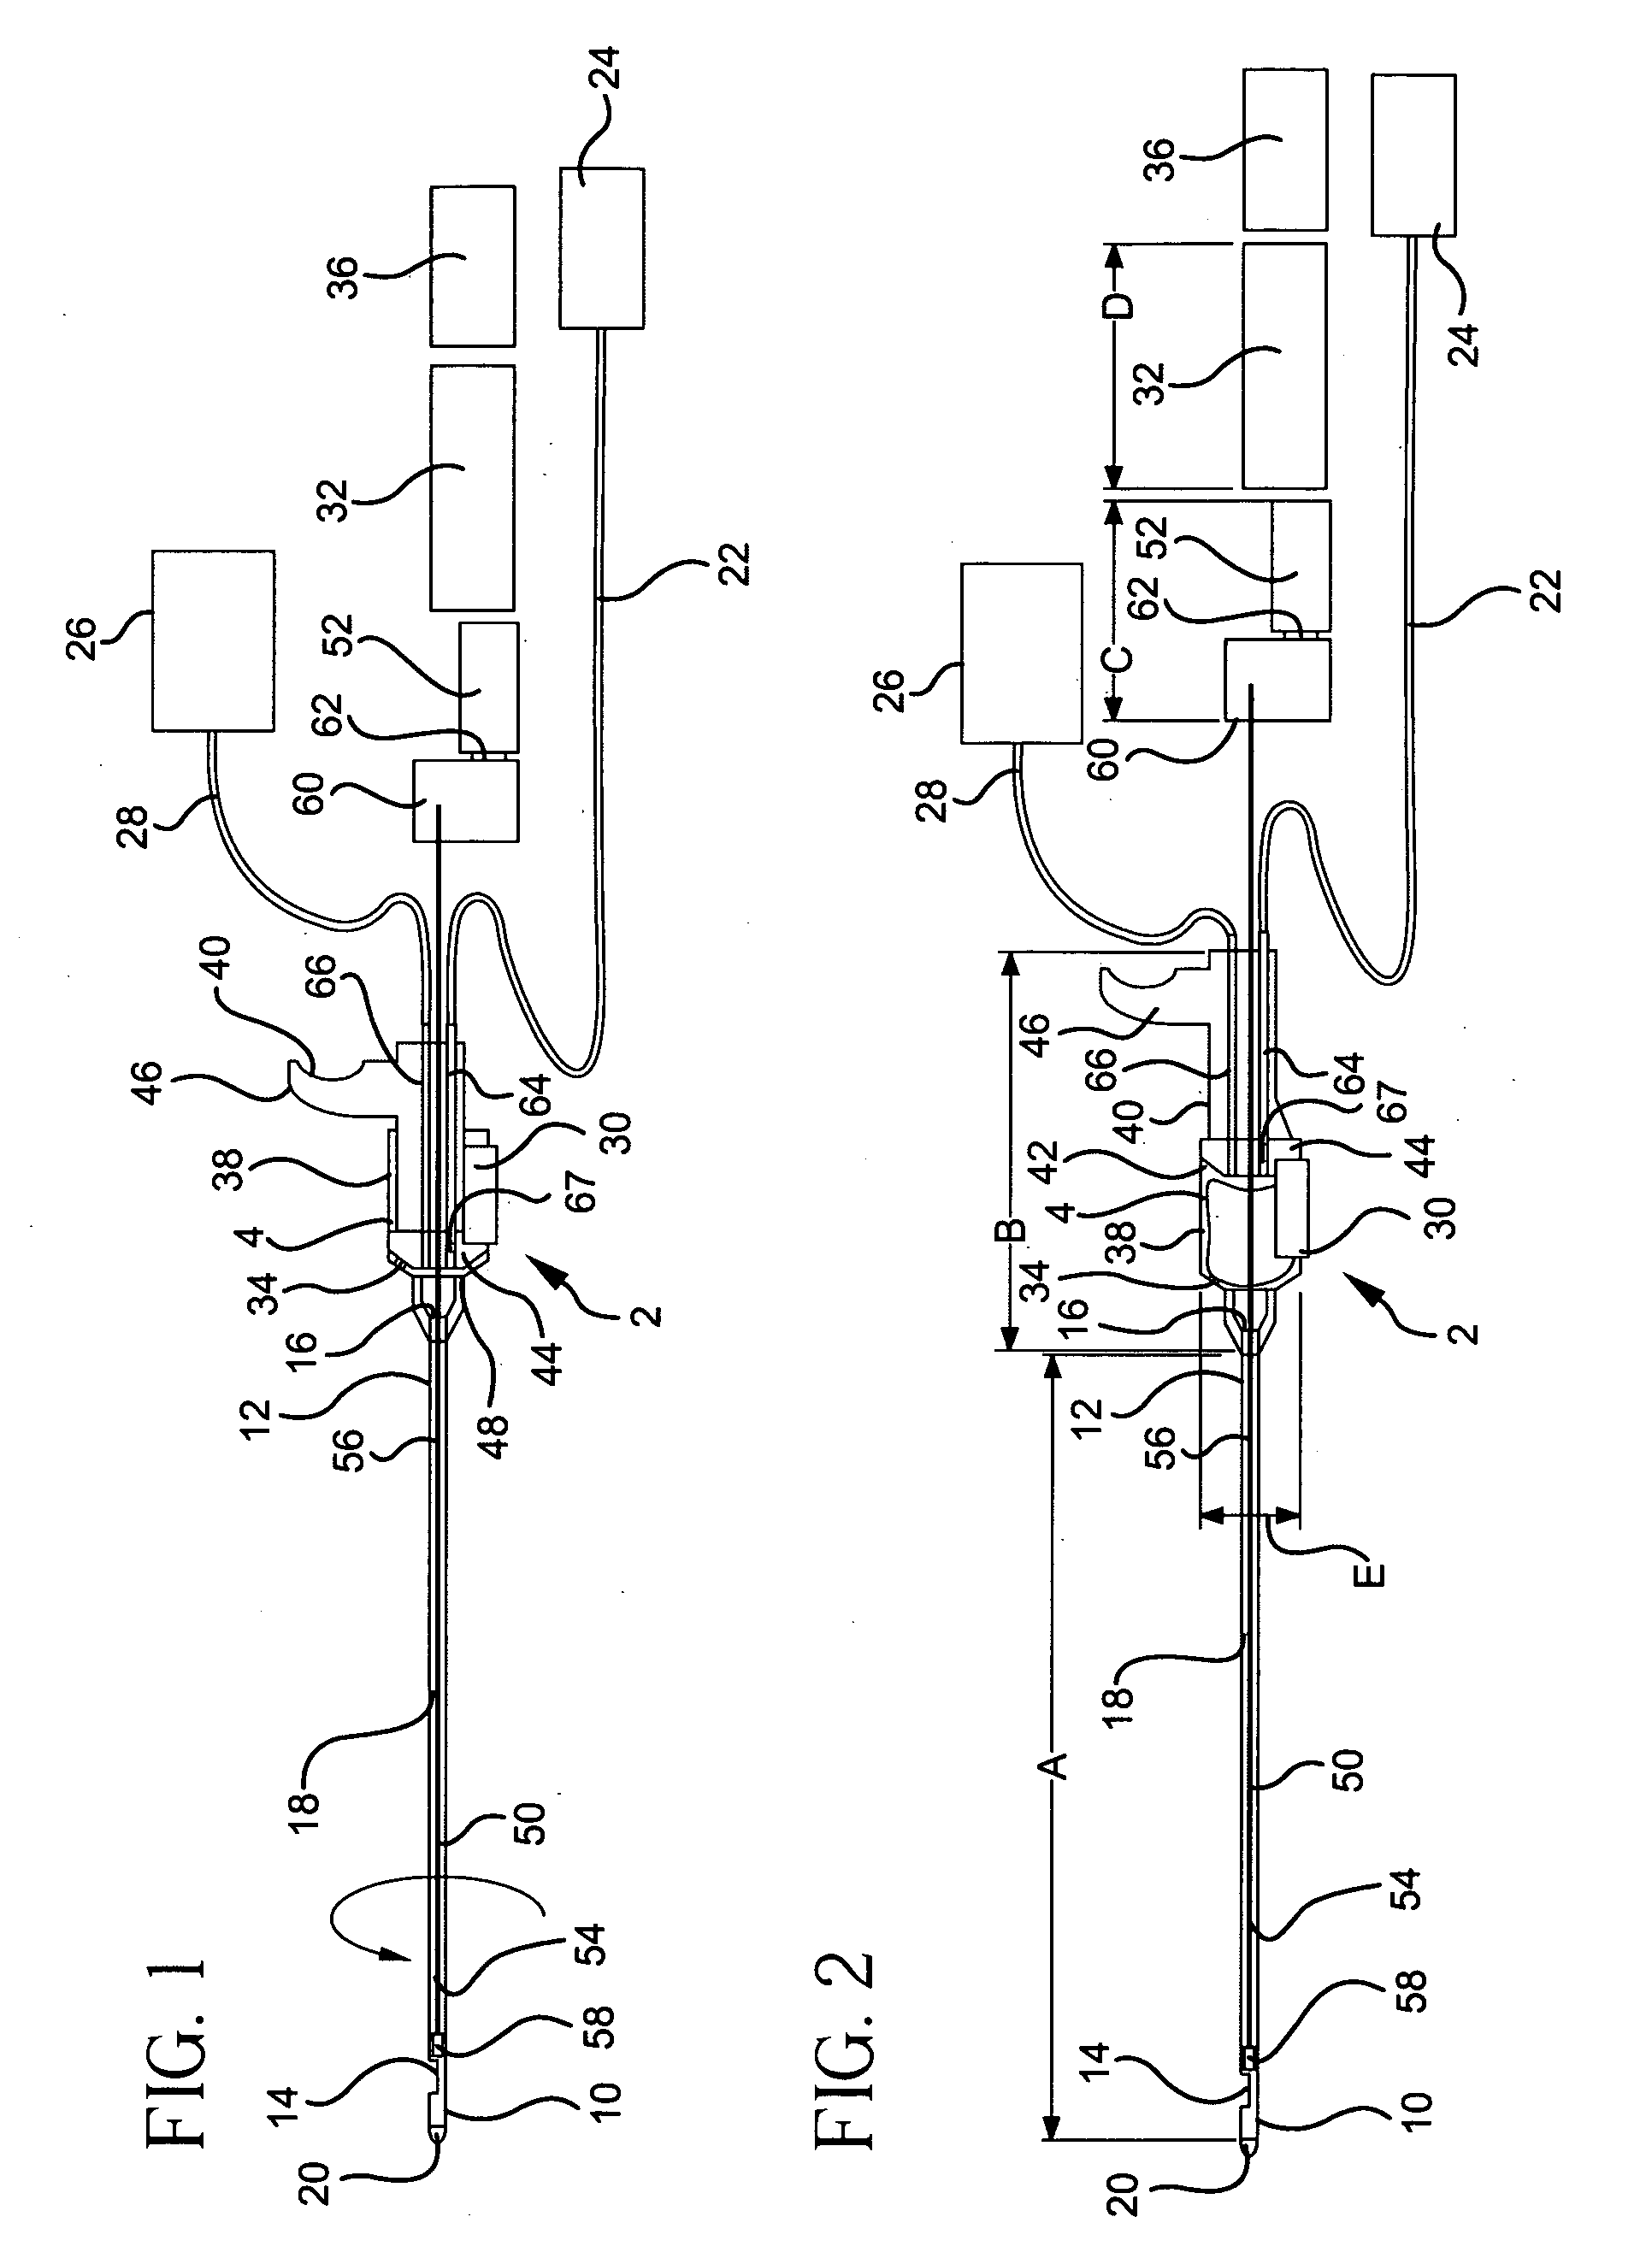 Method and device for repositioning tissue